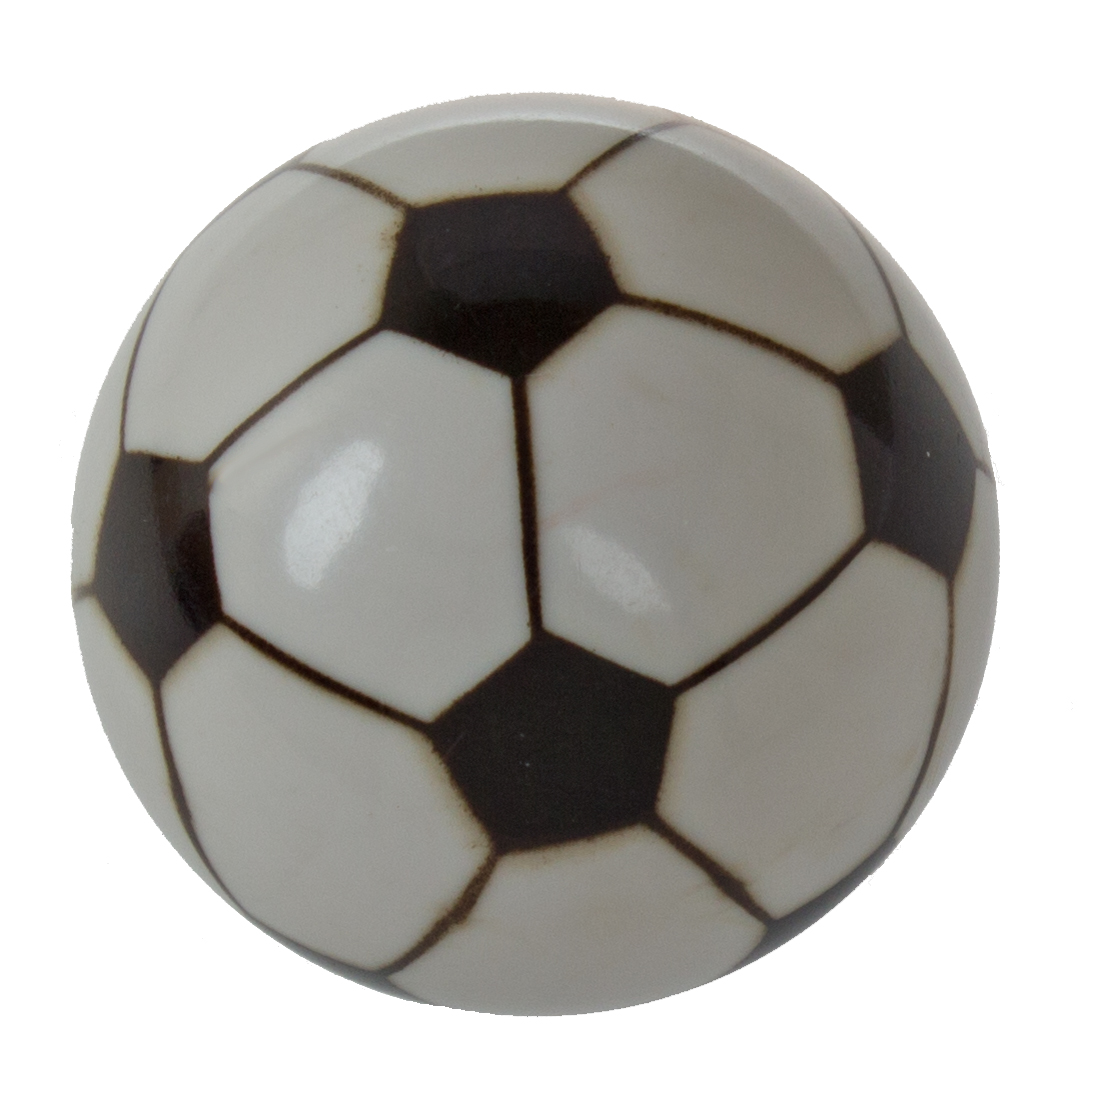 GlideRite 1-1/4 in. Soccer Ball Sports Dresser Drawer Cabinet Knobs, Pack of 25 - image 1 of 4